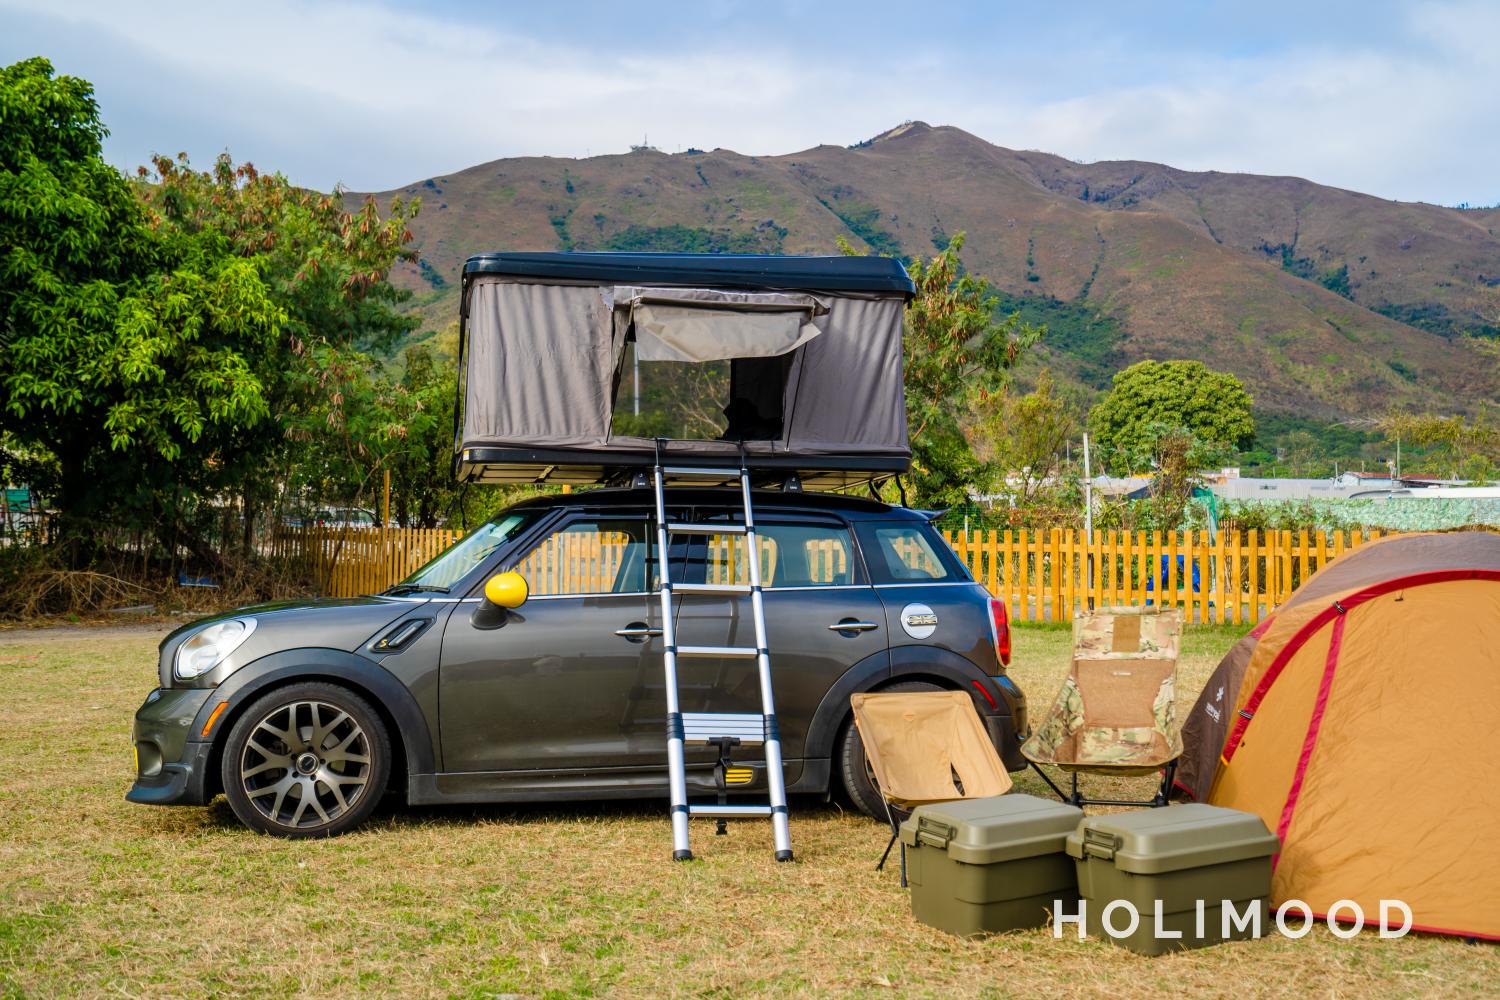 DNA 租車 【Girl Dream Car】Mini Cooper Countryman Roof Camping and Car Camping Experience 15